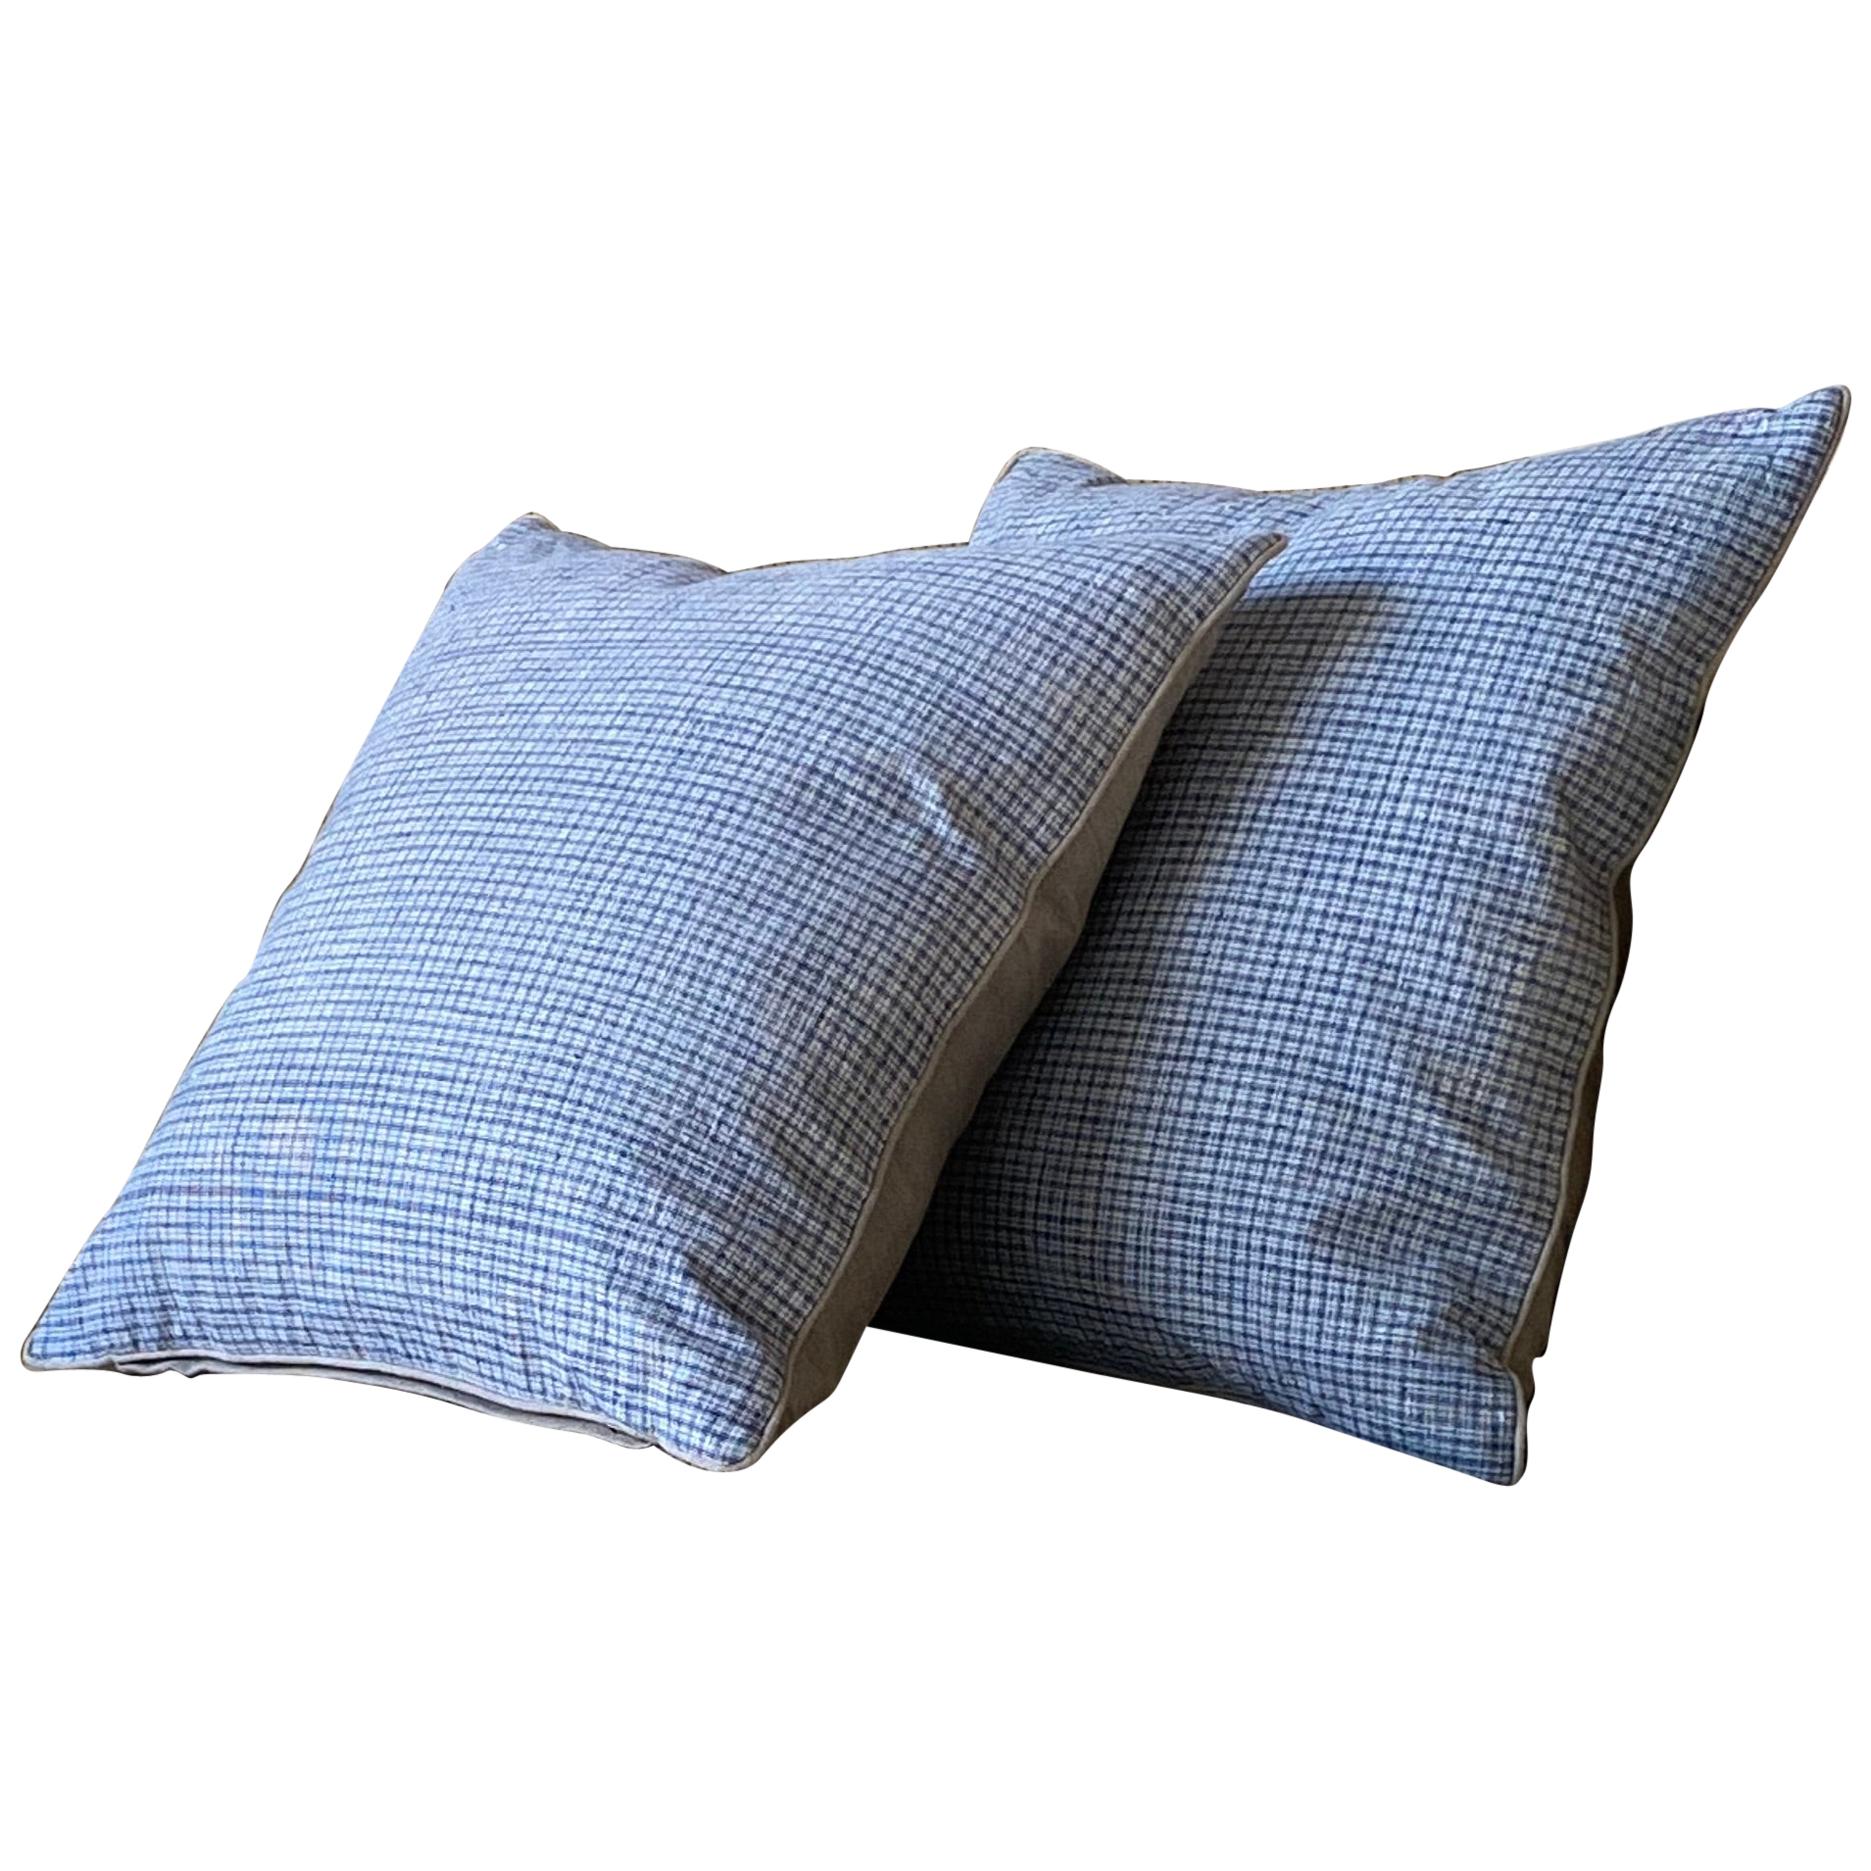 Blue and Natural Ticking Pillow Made from Antique Textiles